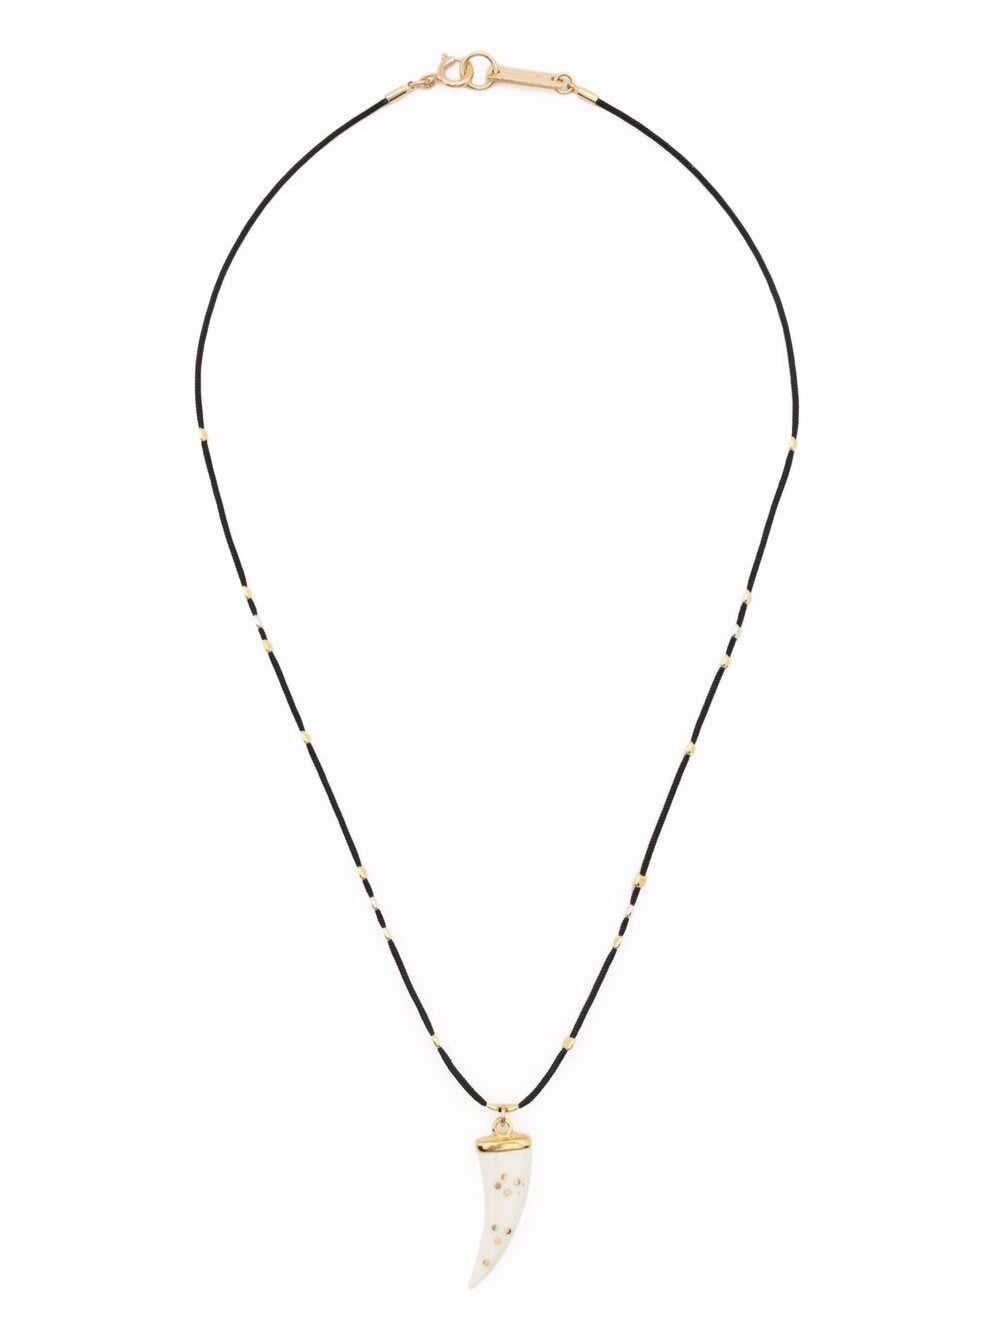 Isabel Marant Womans Black Rope Necklace With Buffalo Horn Pendant